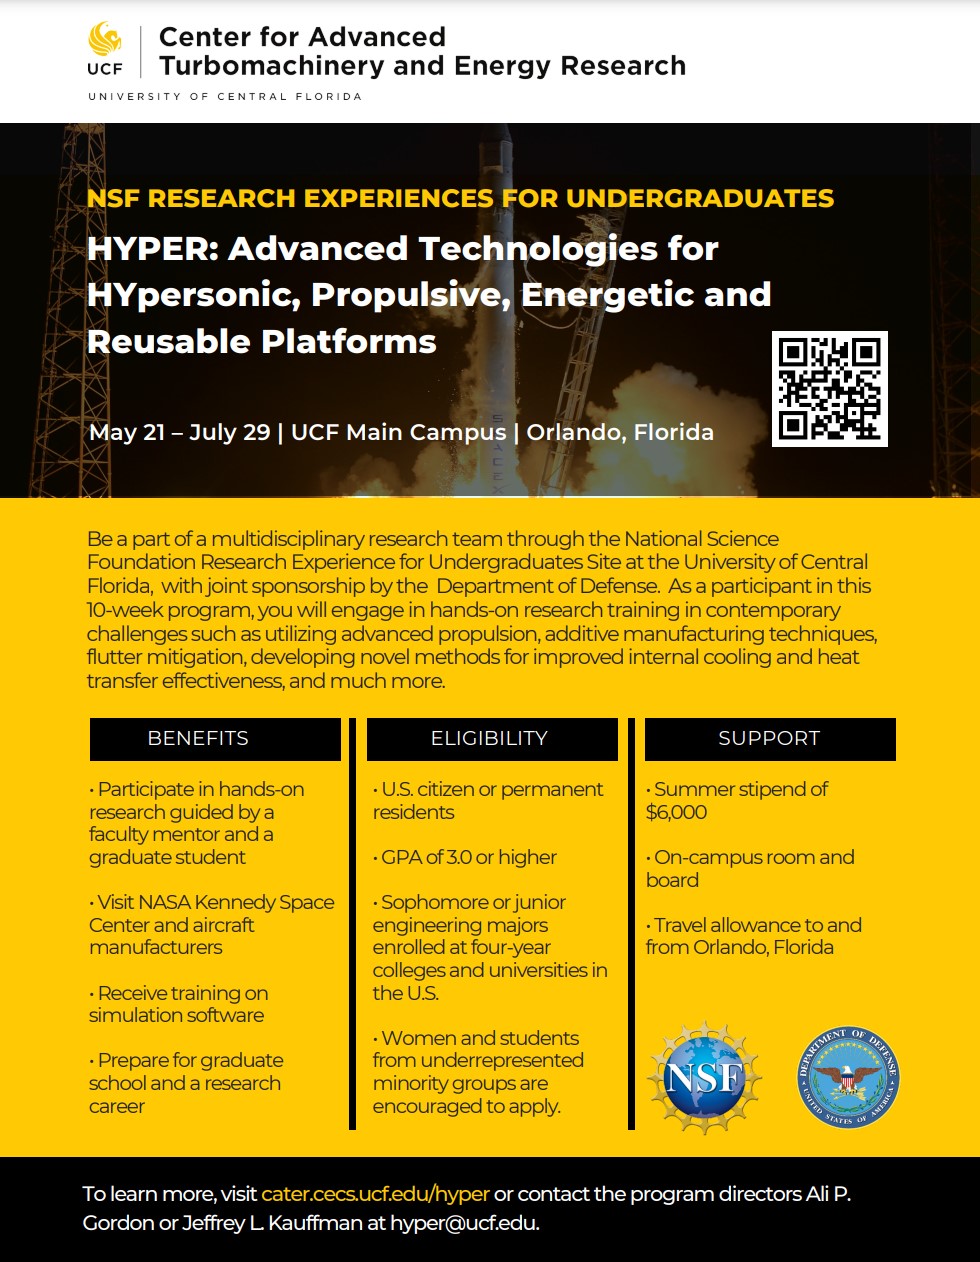 HYPER: Advanced Technologies for Hypersonic, Propulsive, Energetic, and Reusable Platforms REU at UCF